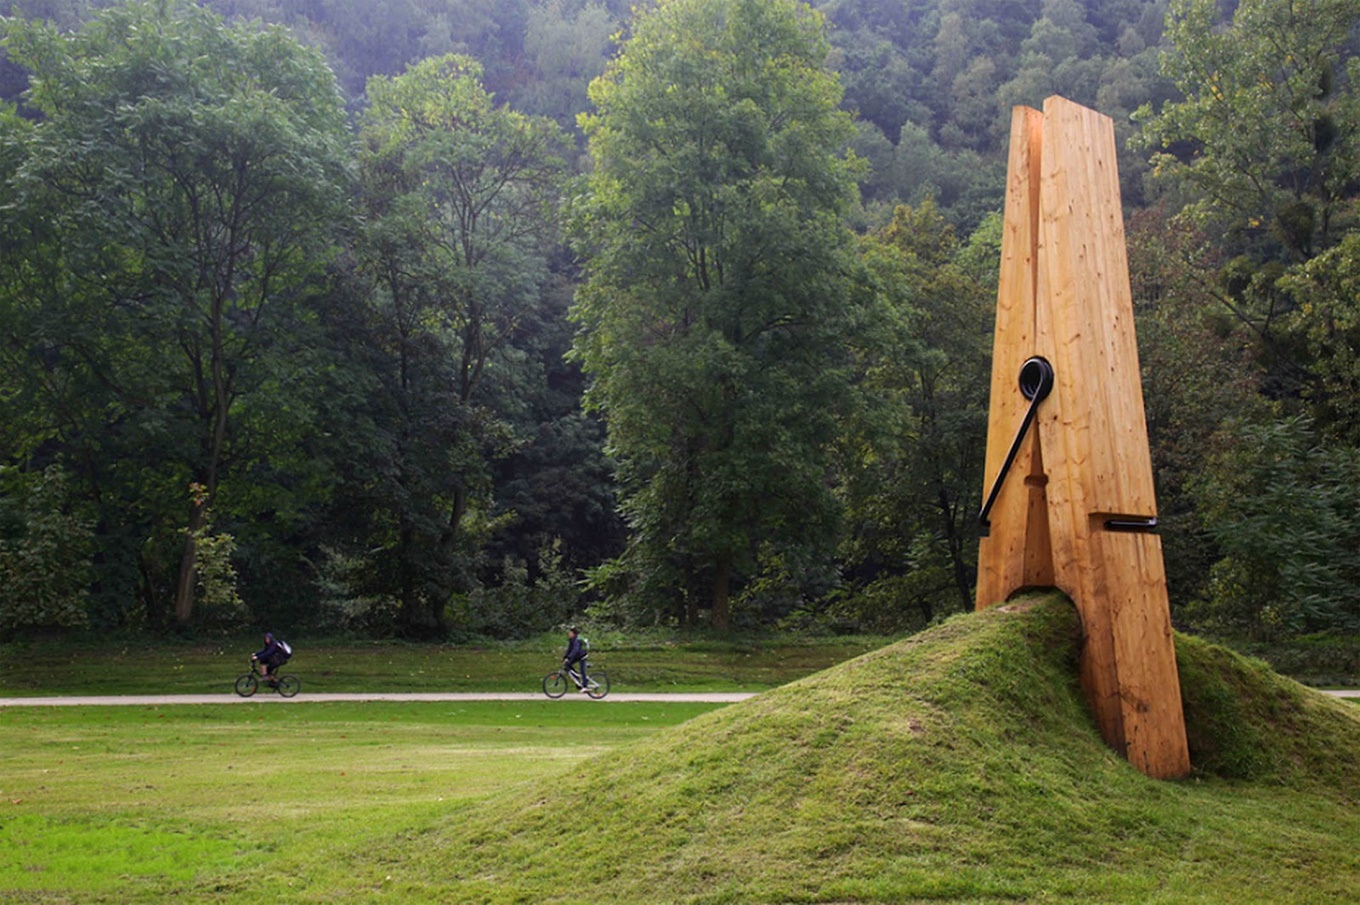 Trees Forest Nature Clothespin Artwork Park Hill Grass Wood Cycling Giant Belgium Sculpture Photo Ma 1360x905